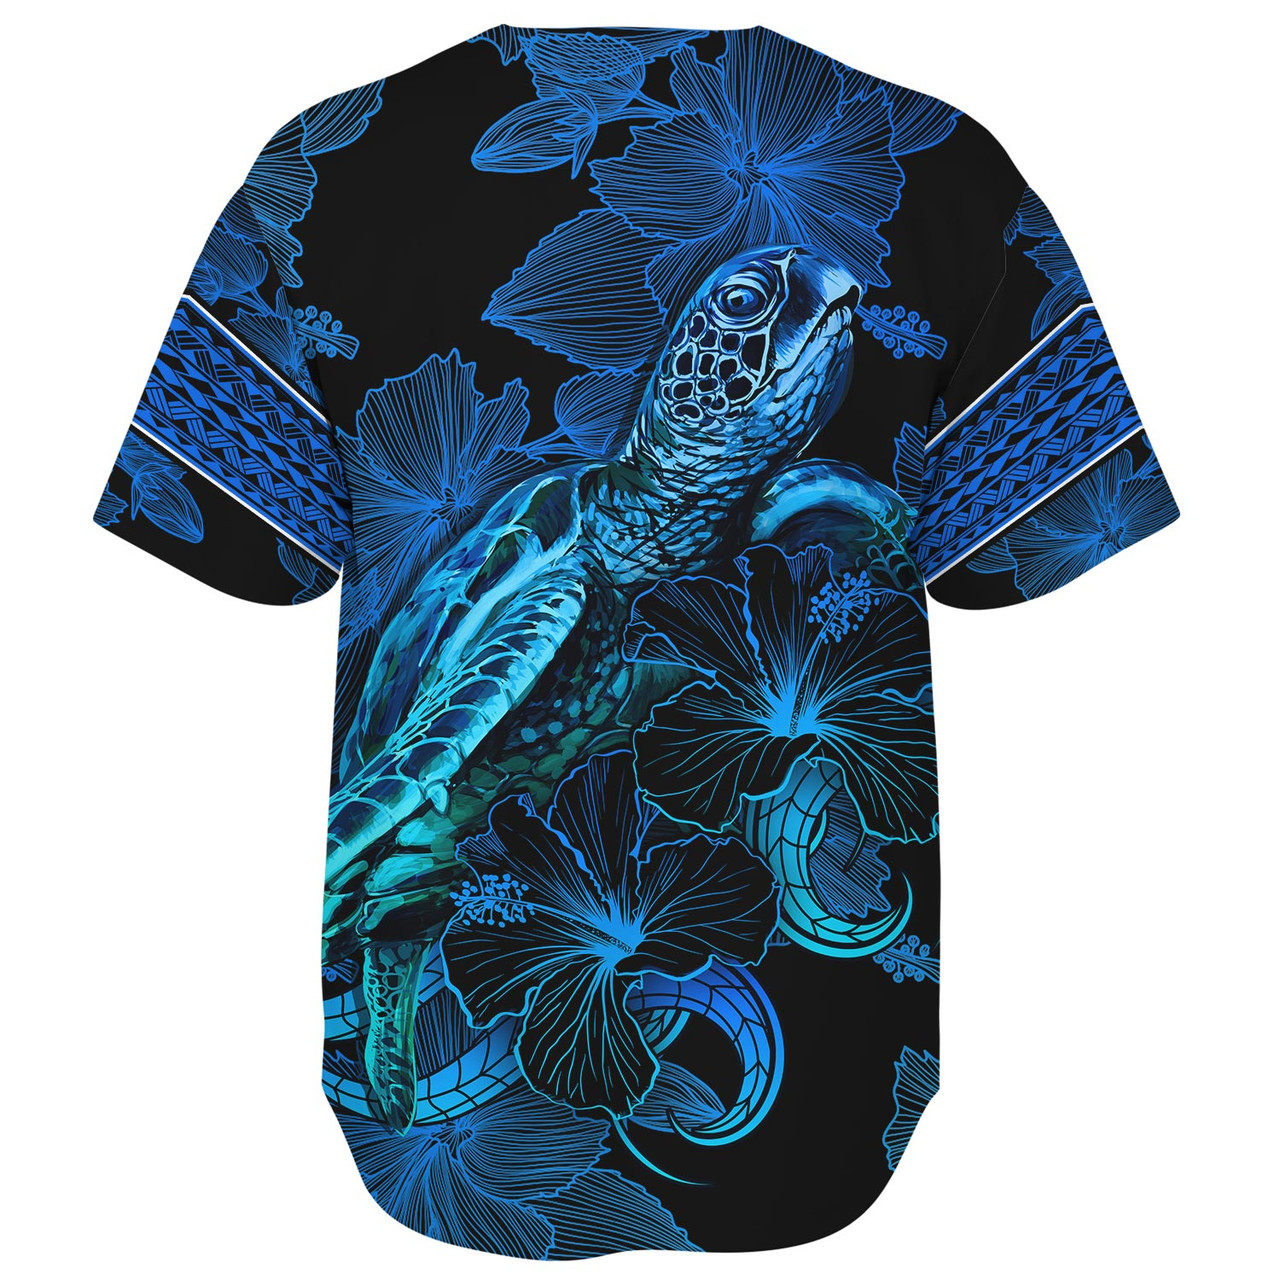 Pohnpei State Baseball Shirt Sea Turtle With Blooming Hibiscus Flowers Tribal Blue